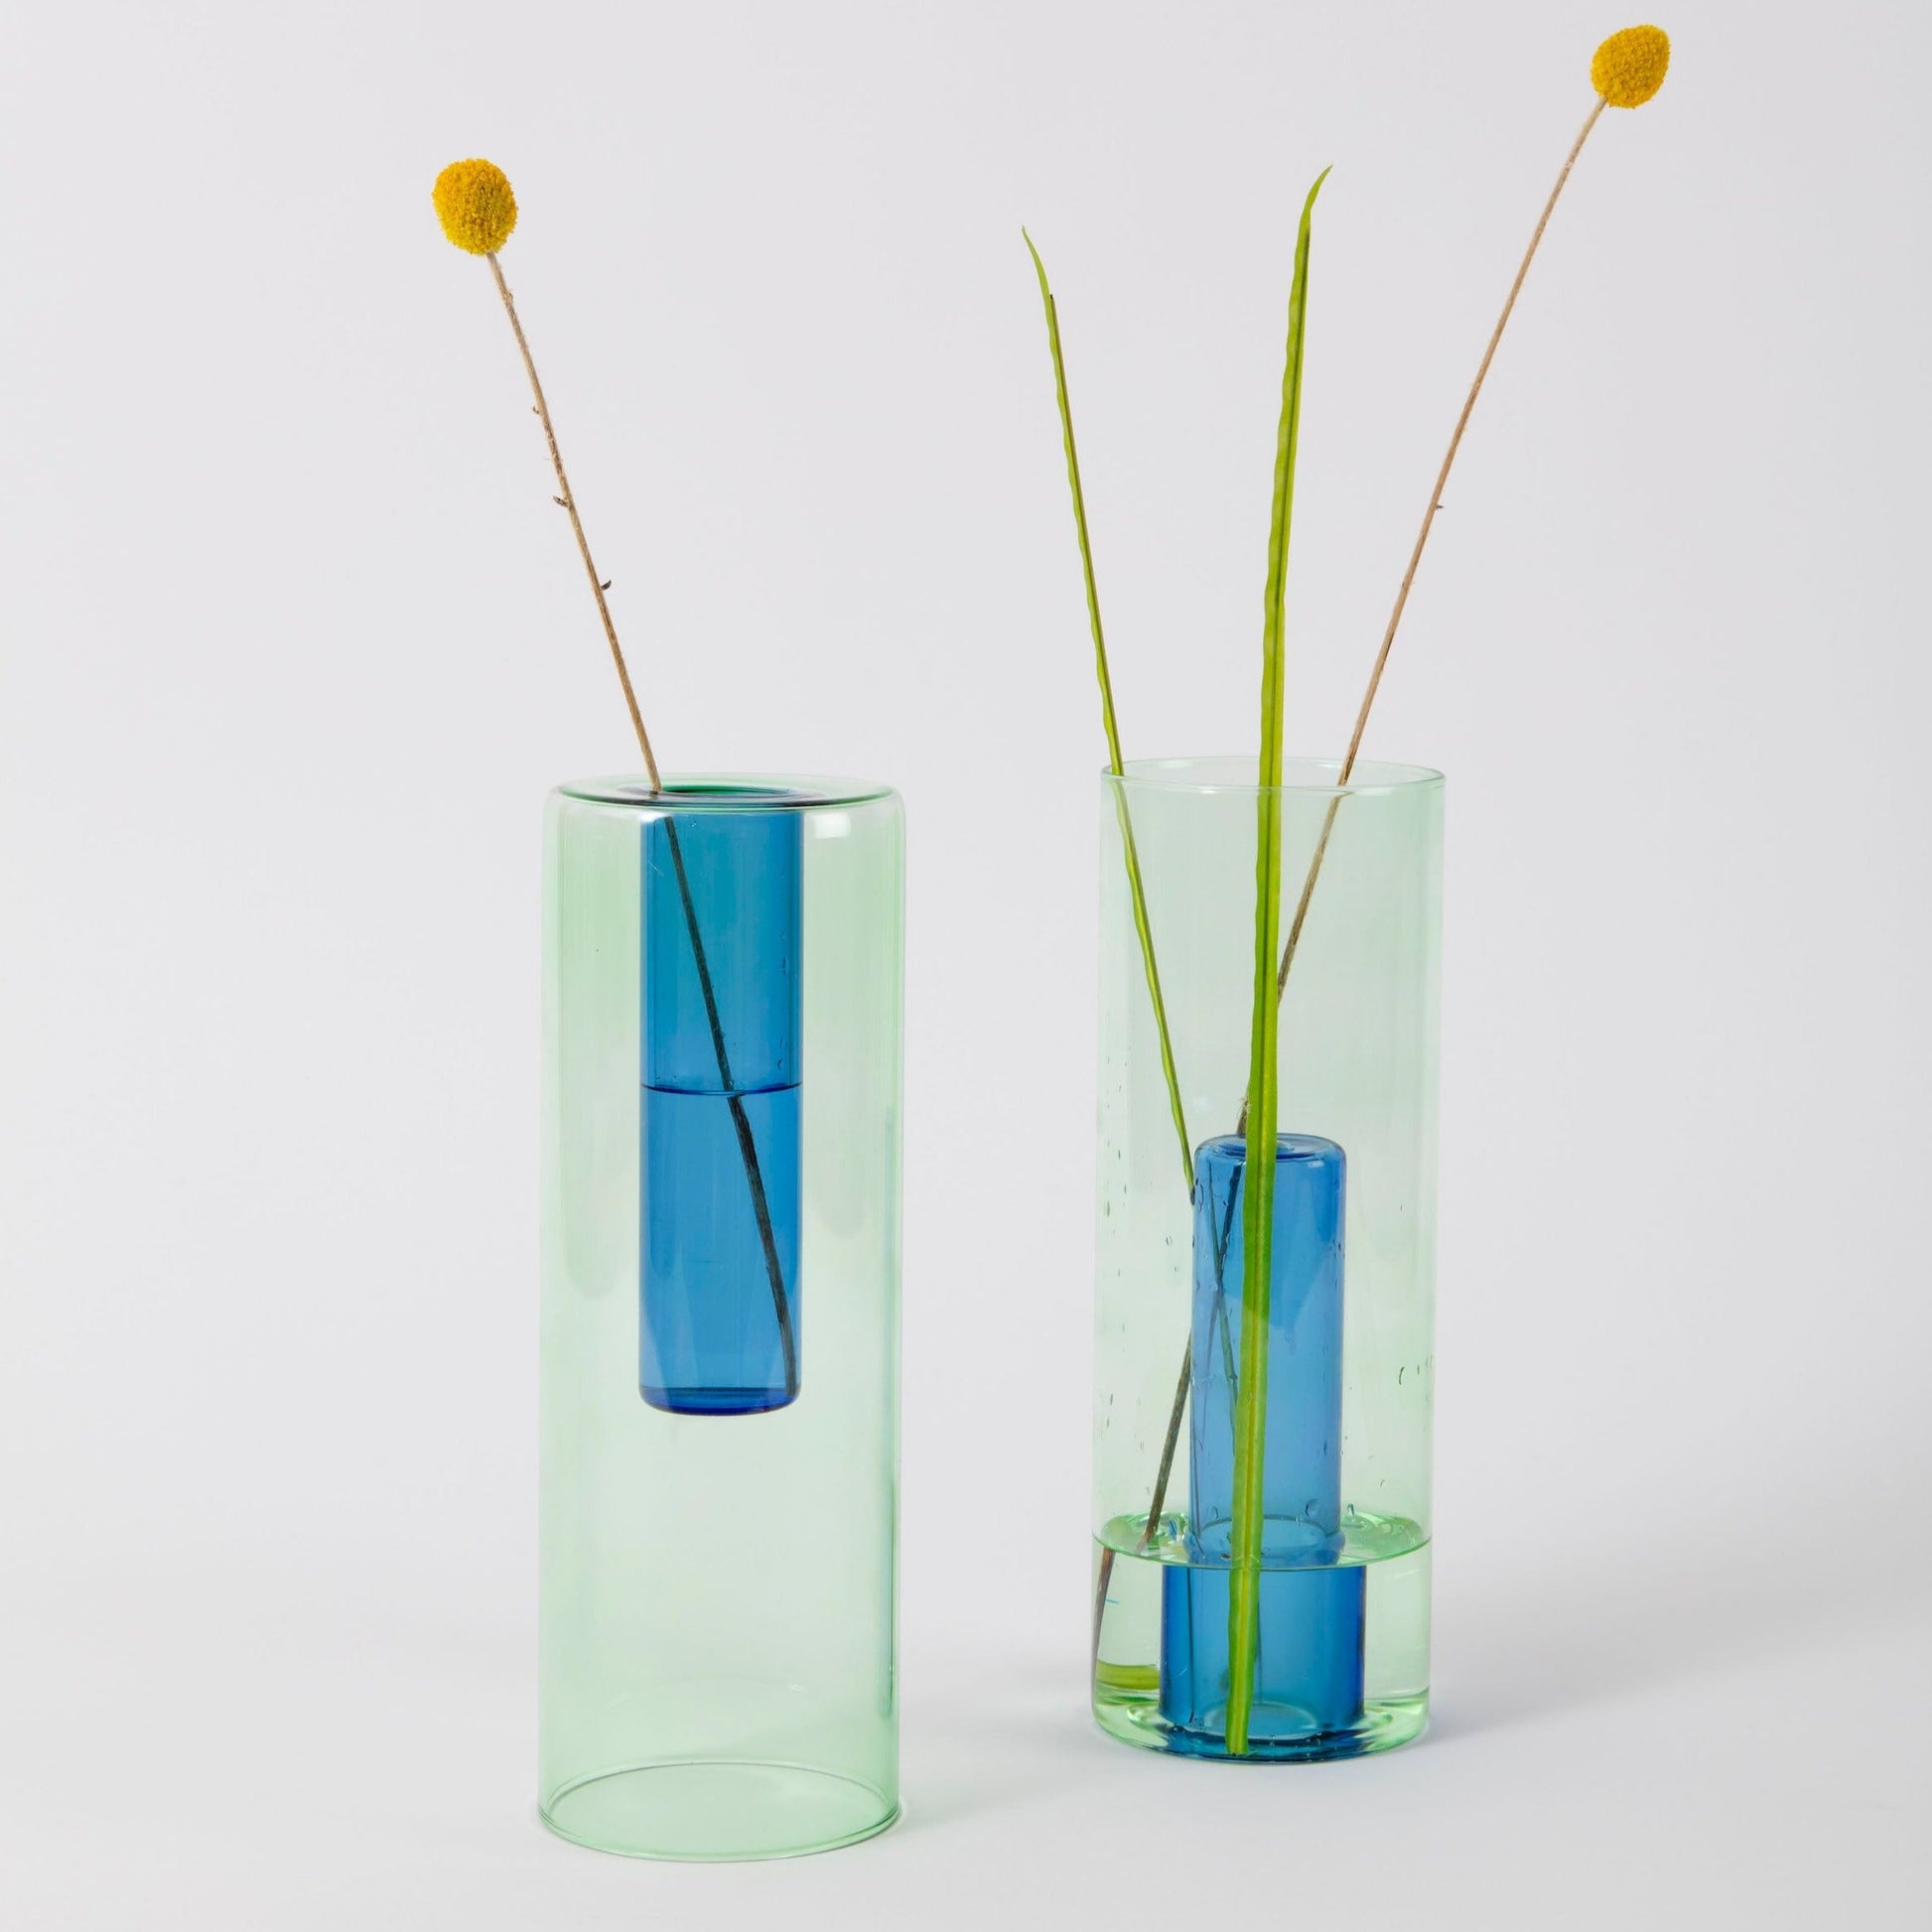 stunning duel purpose vase in blue and green glass from Block Design